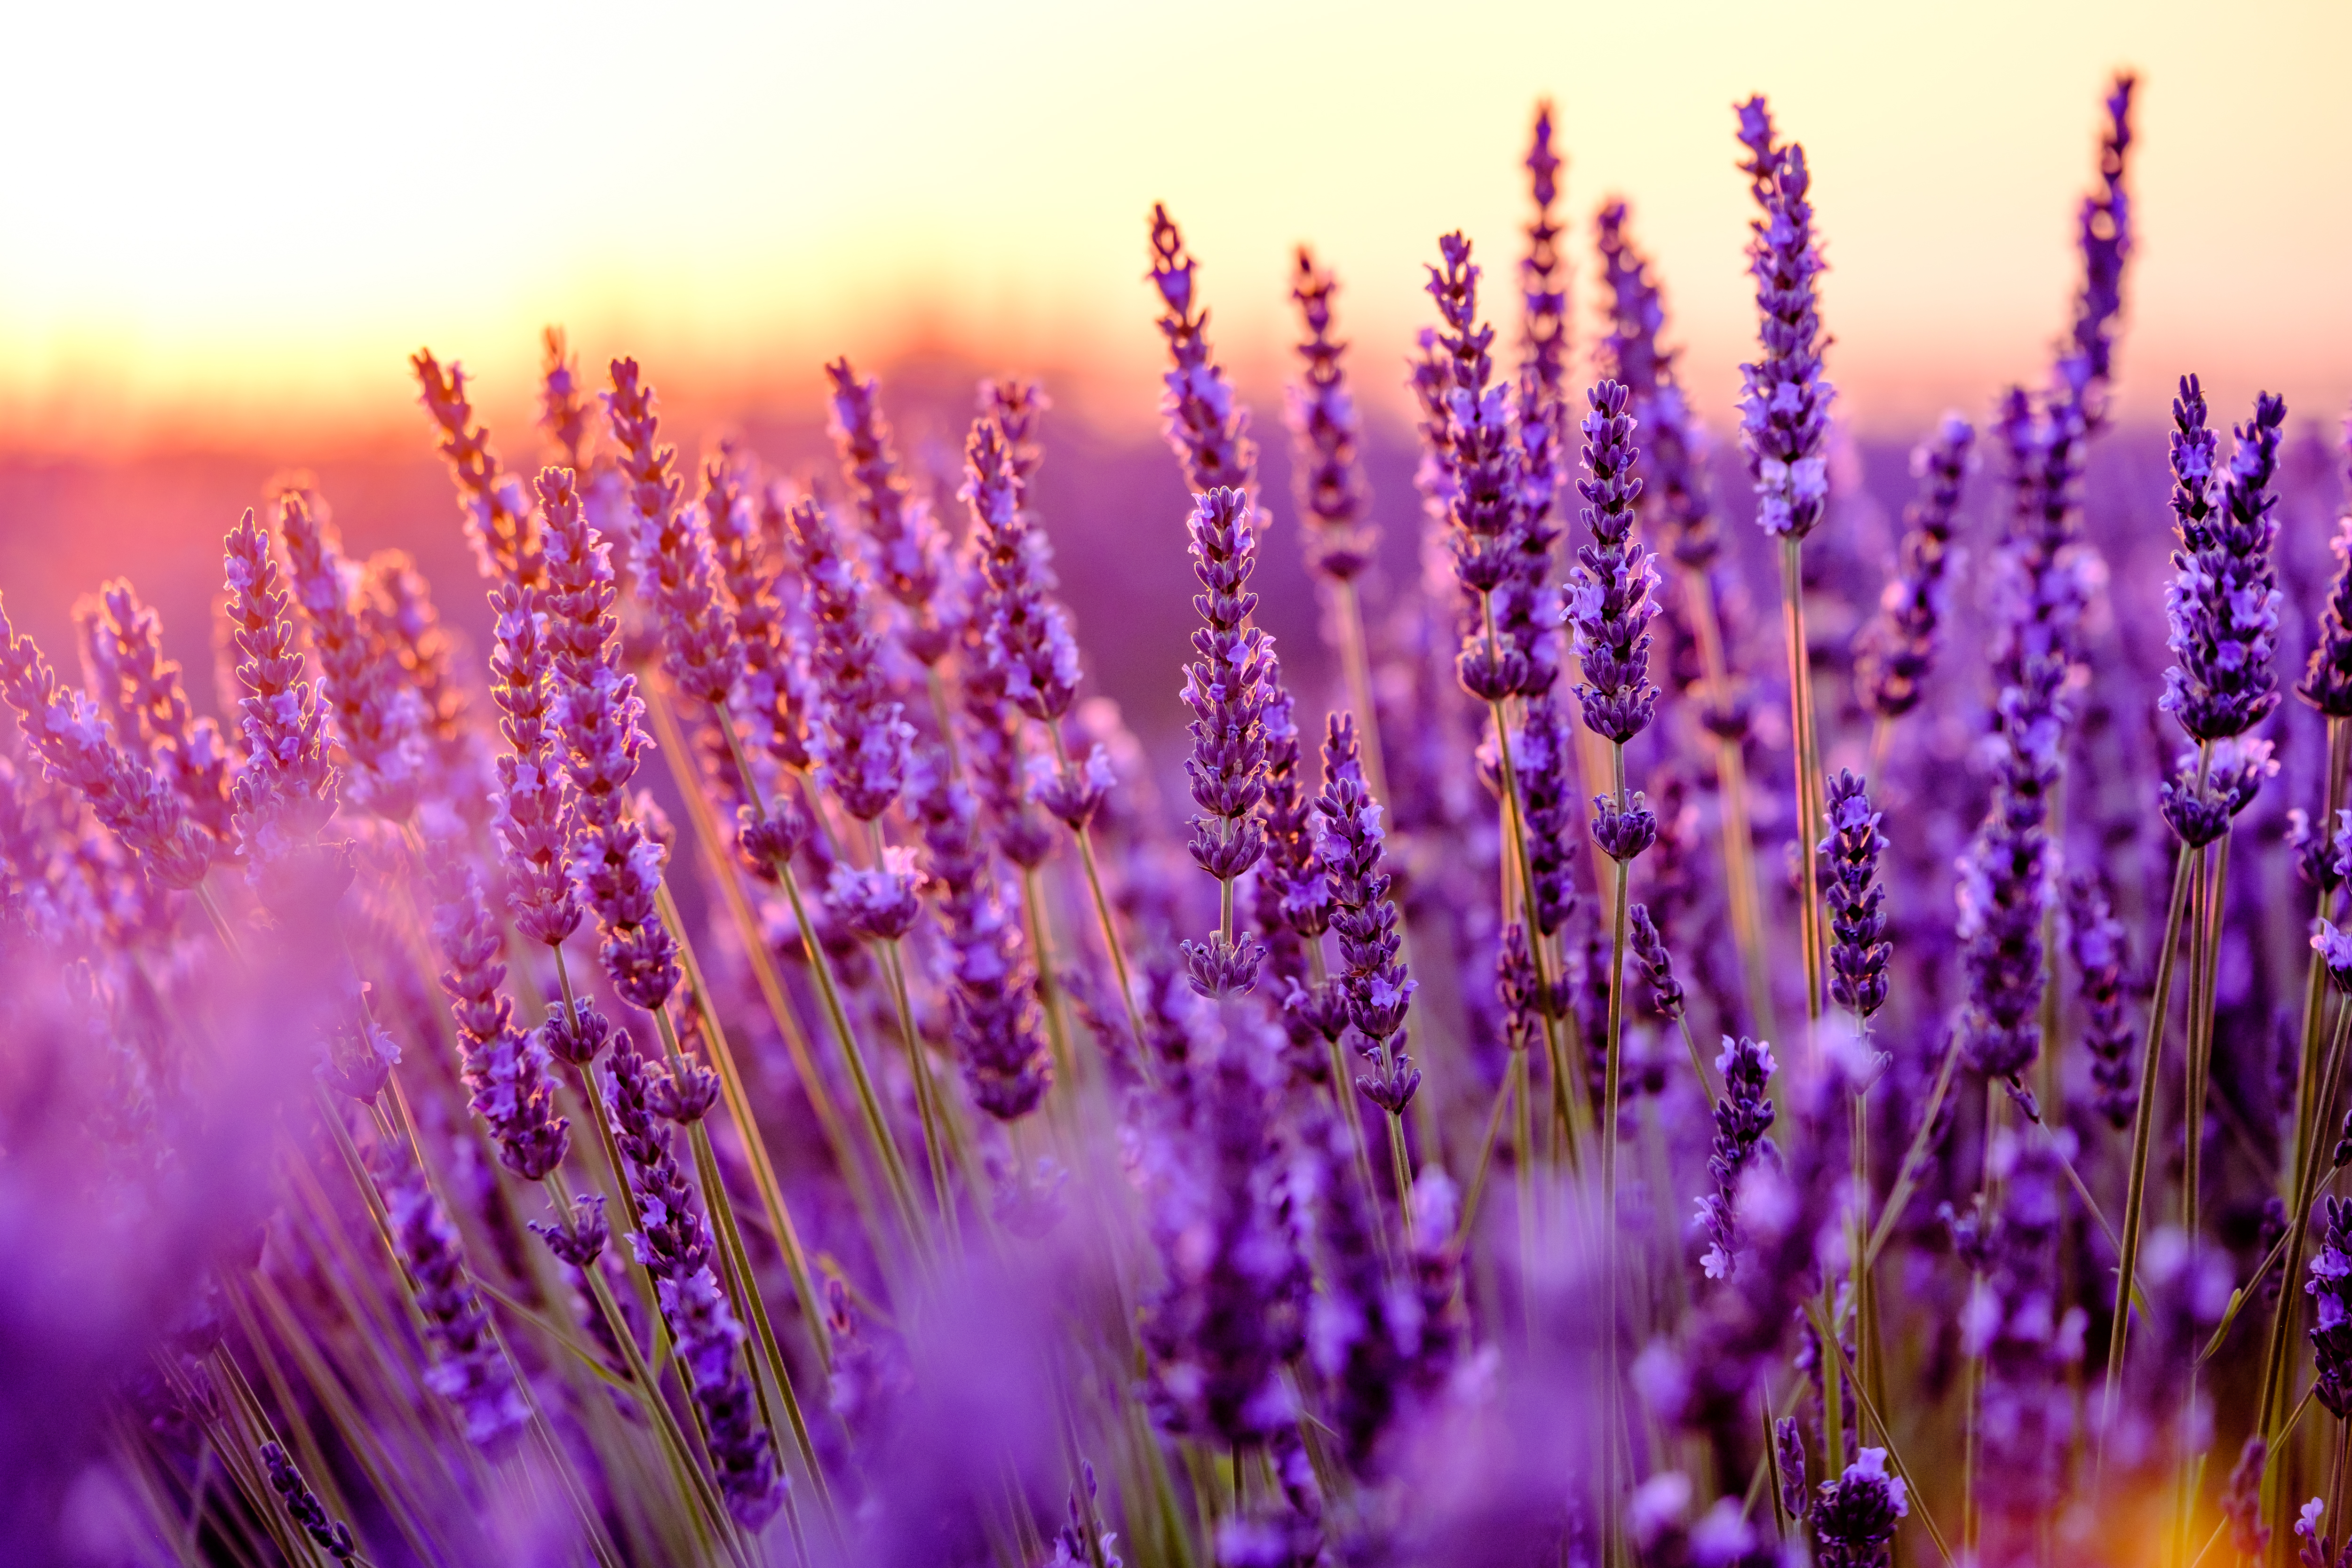 Lavender plant in a field